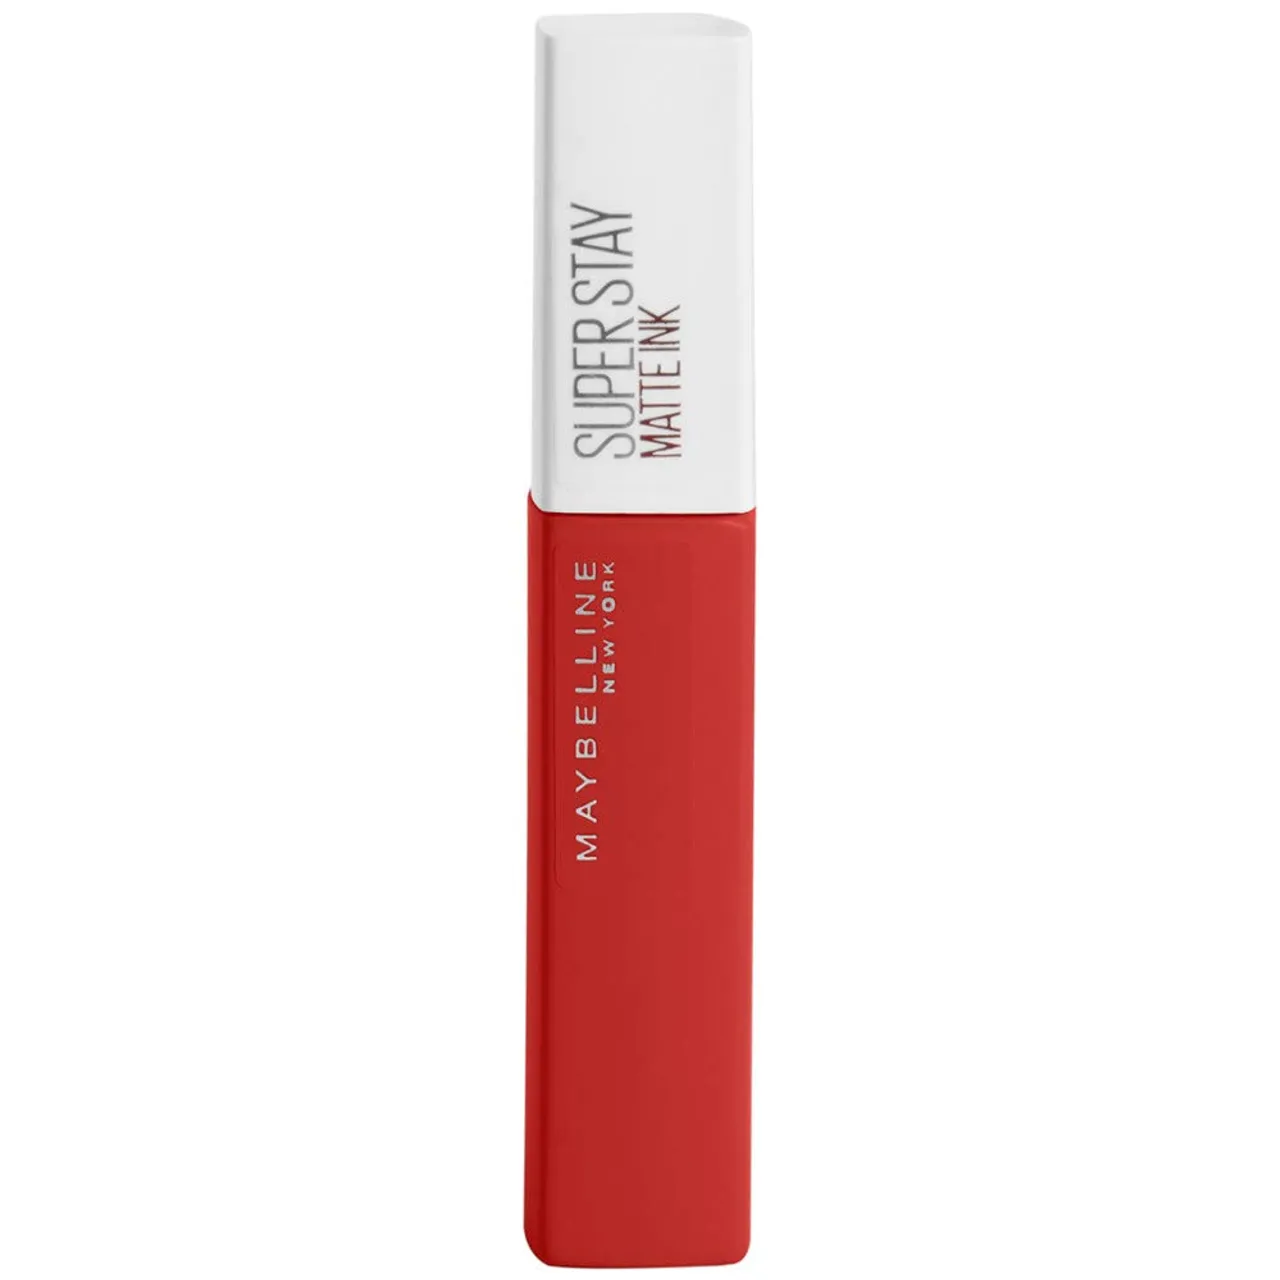 Maybelline New York Super Stay Matte Ink City Edition